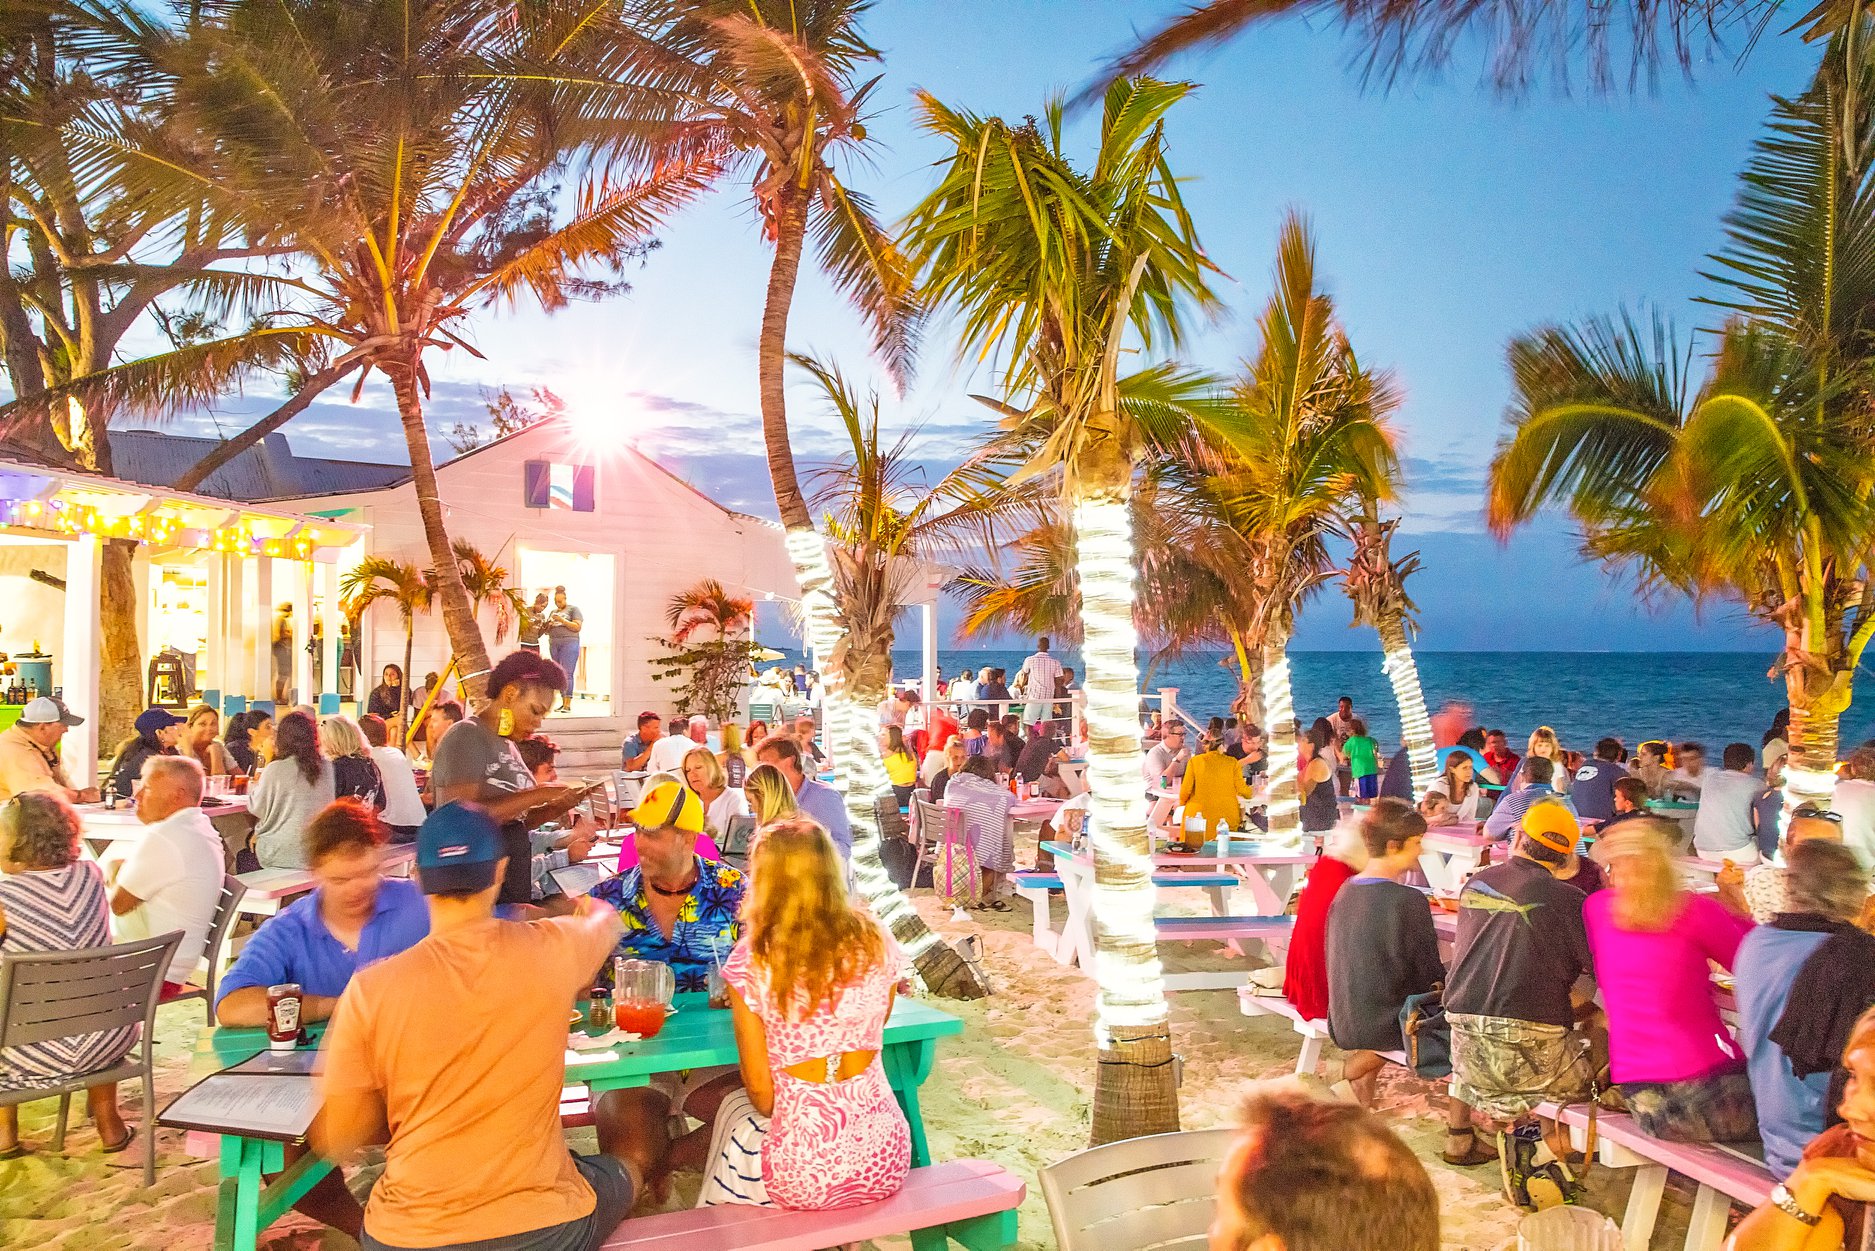 Group of people sitting at tables in the sand amongst ocean views and palm trees with lights wrapped around